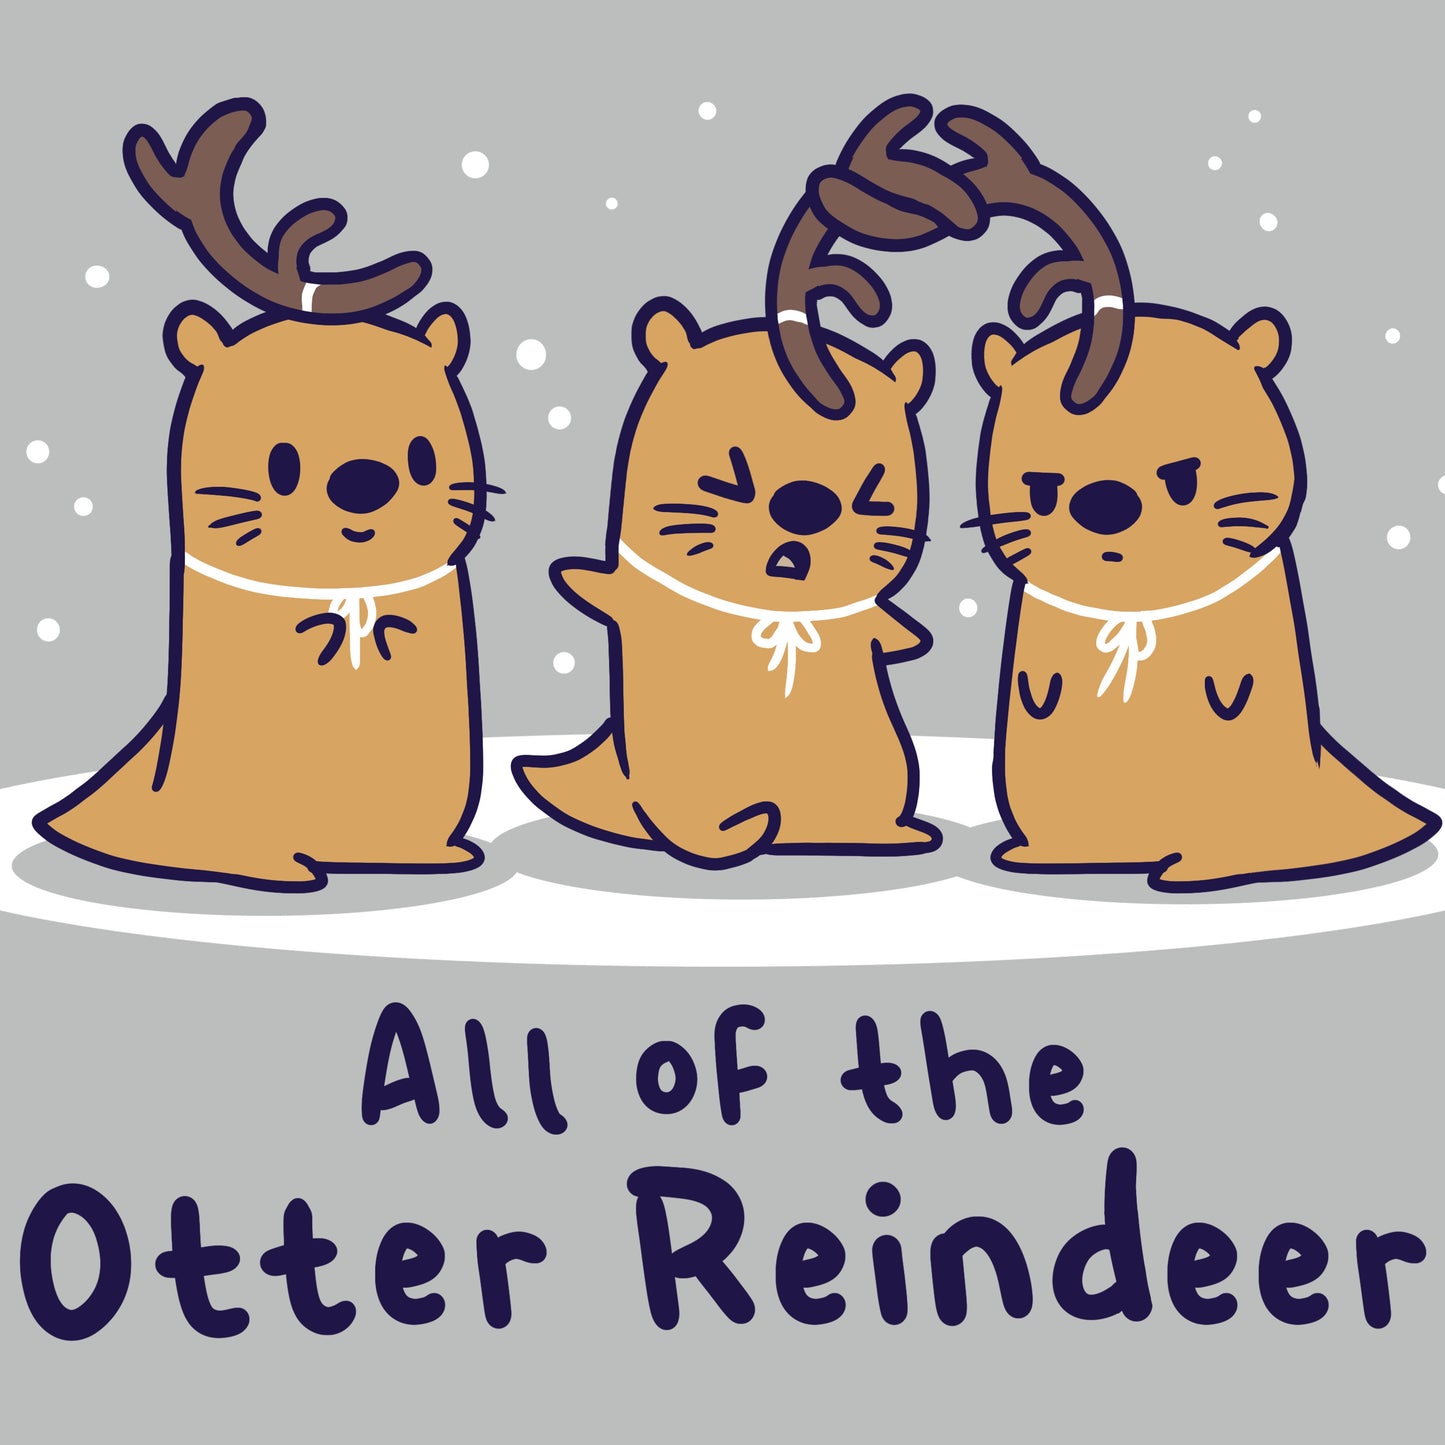 Get in the holiday spirit with our adorable All Of The Otter Reindeer t-shirt from TeeTurtle. Perfect for the holiday season, this shirt features a playful design of otters dressed as reindeer.